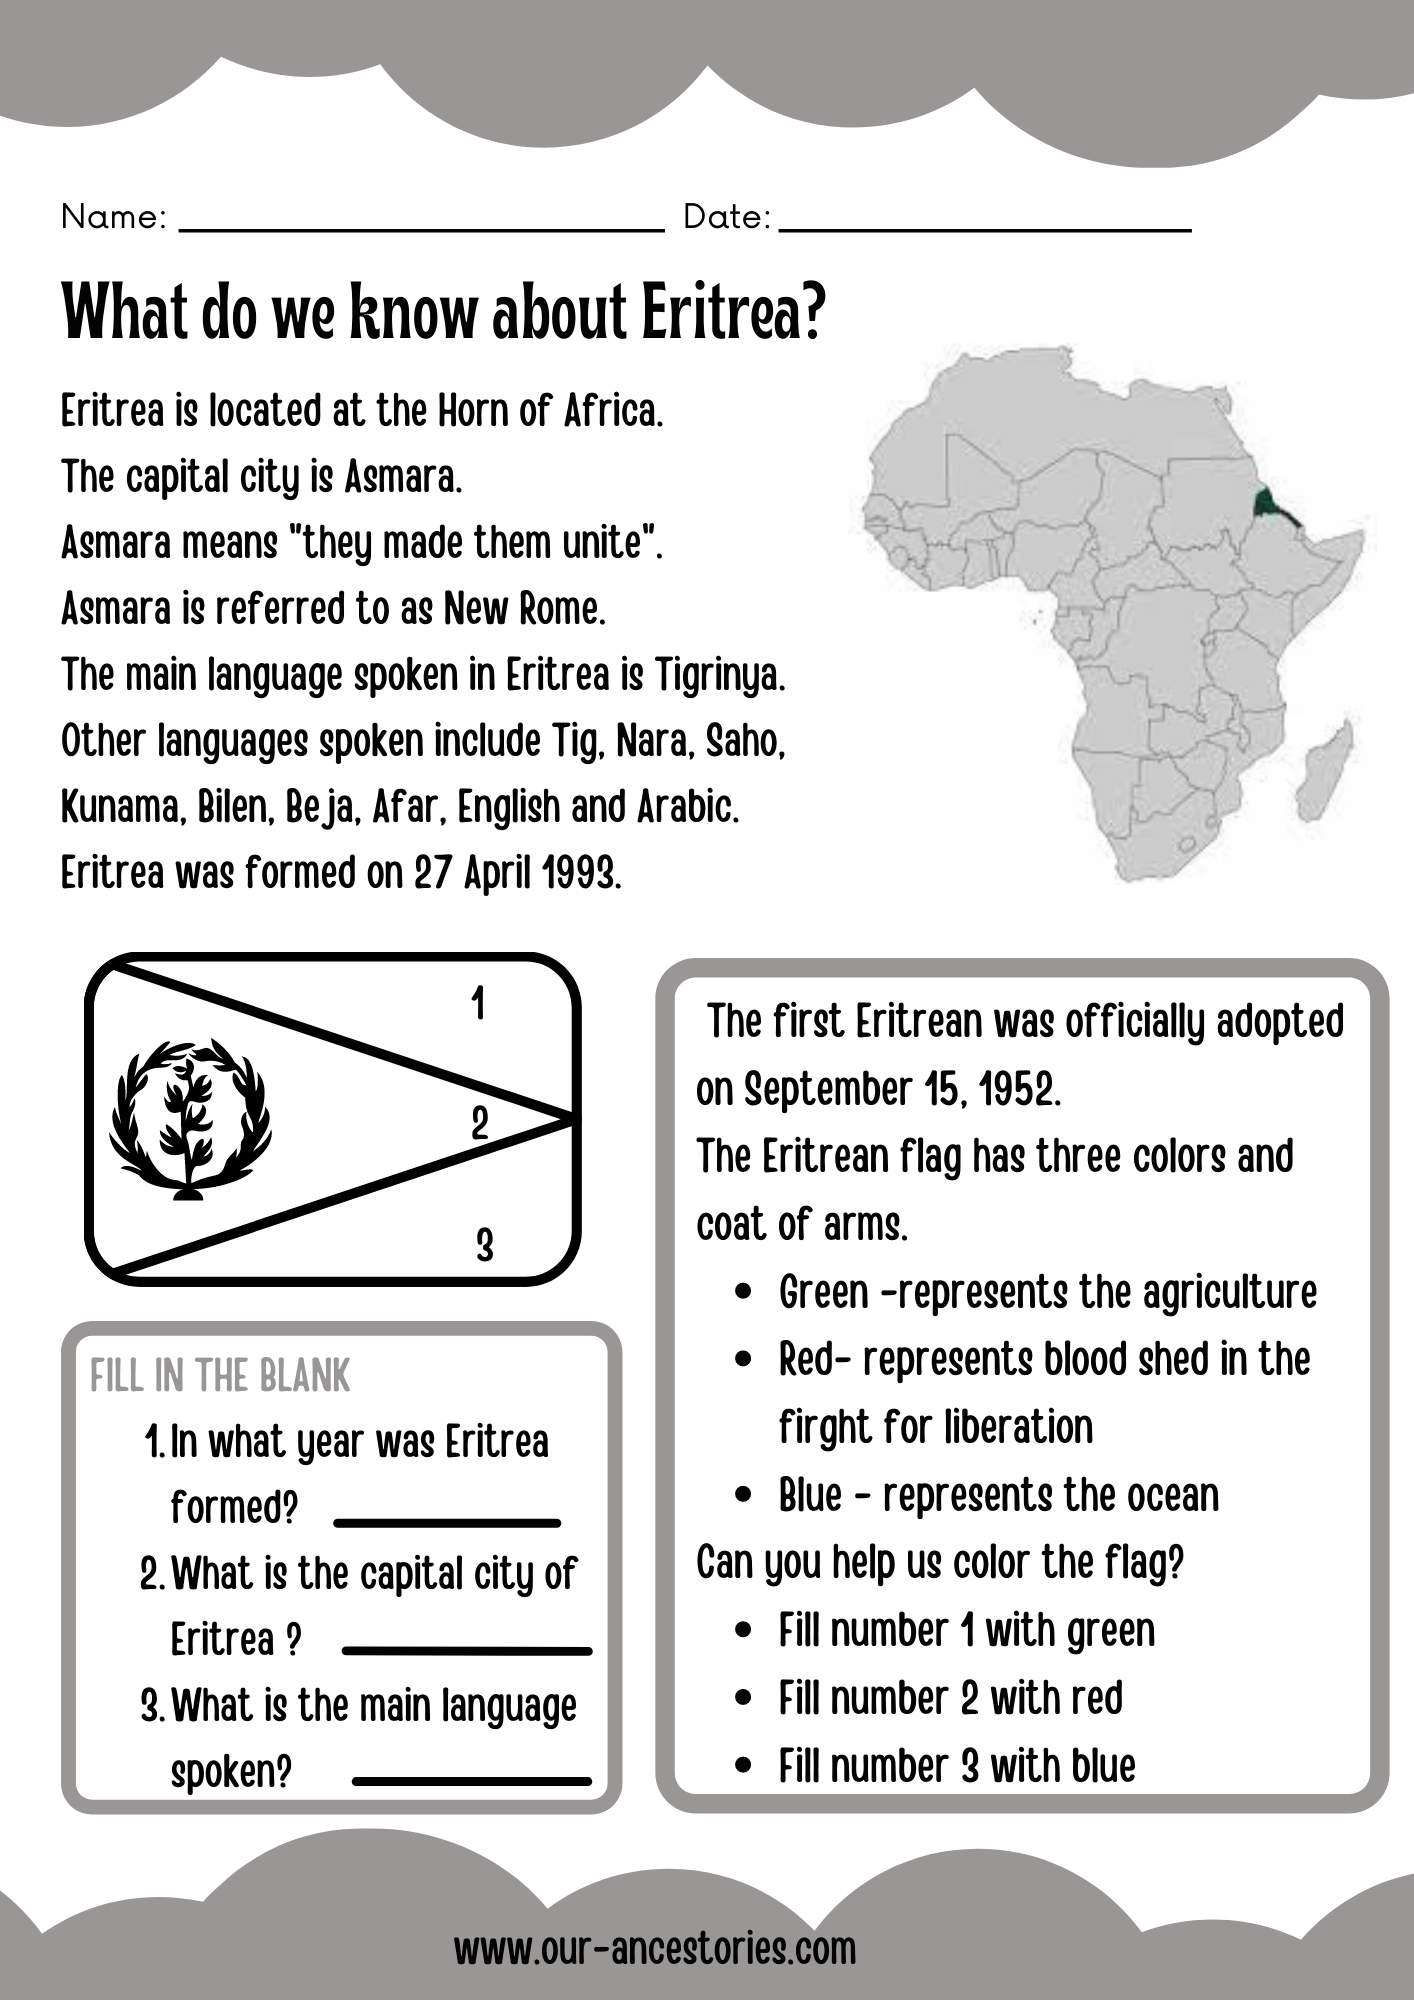 Our Ancestories - Eritrea Country Profile - Free Worksheets